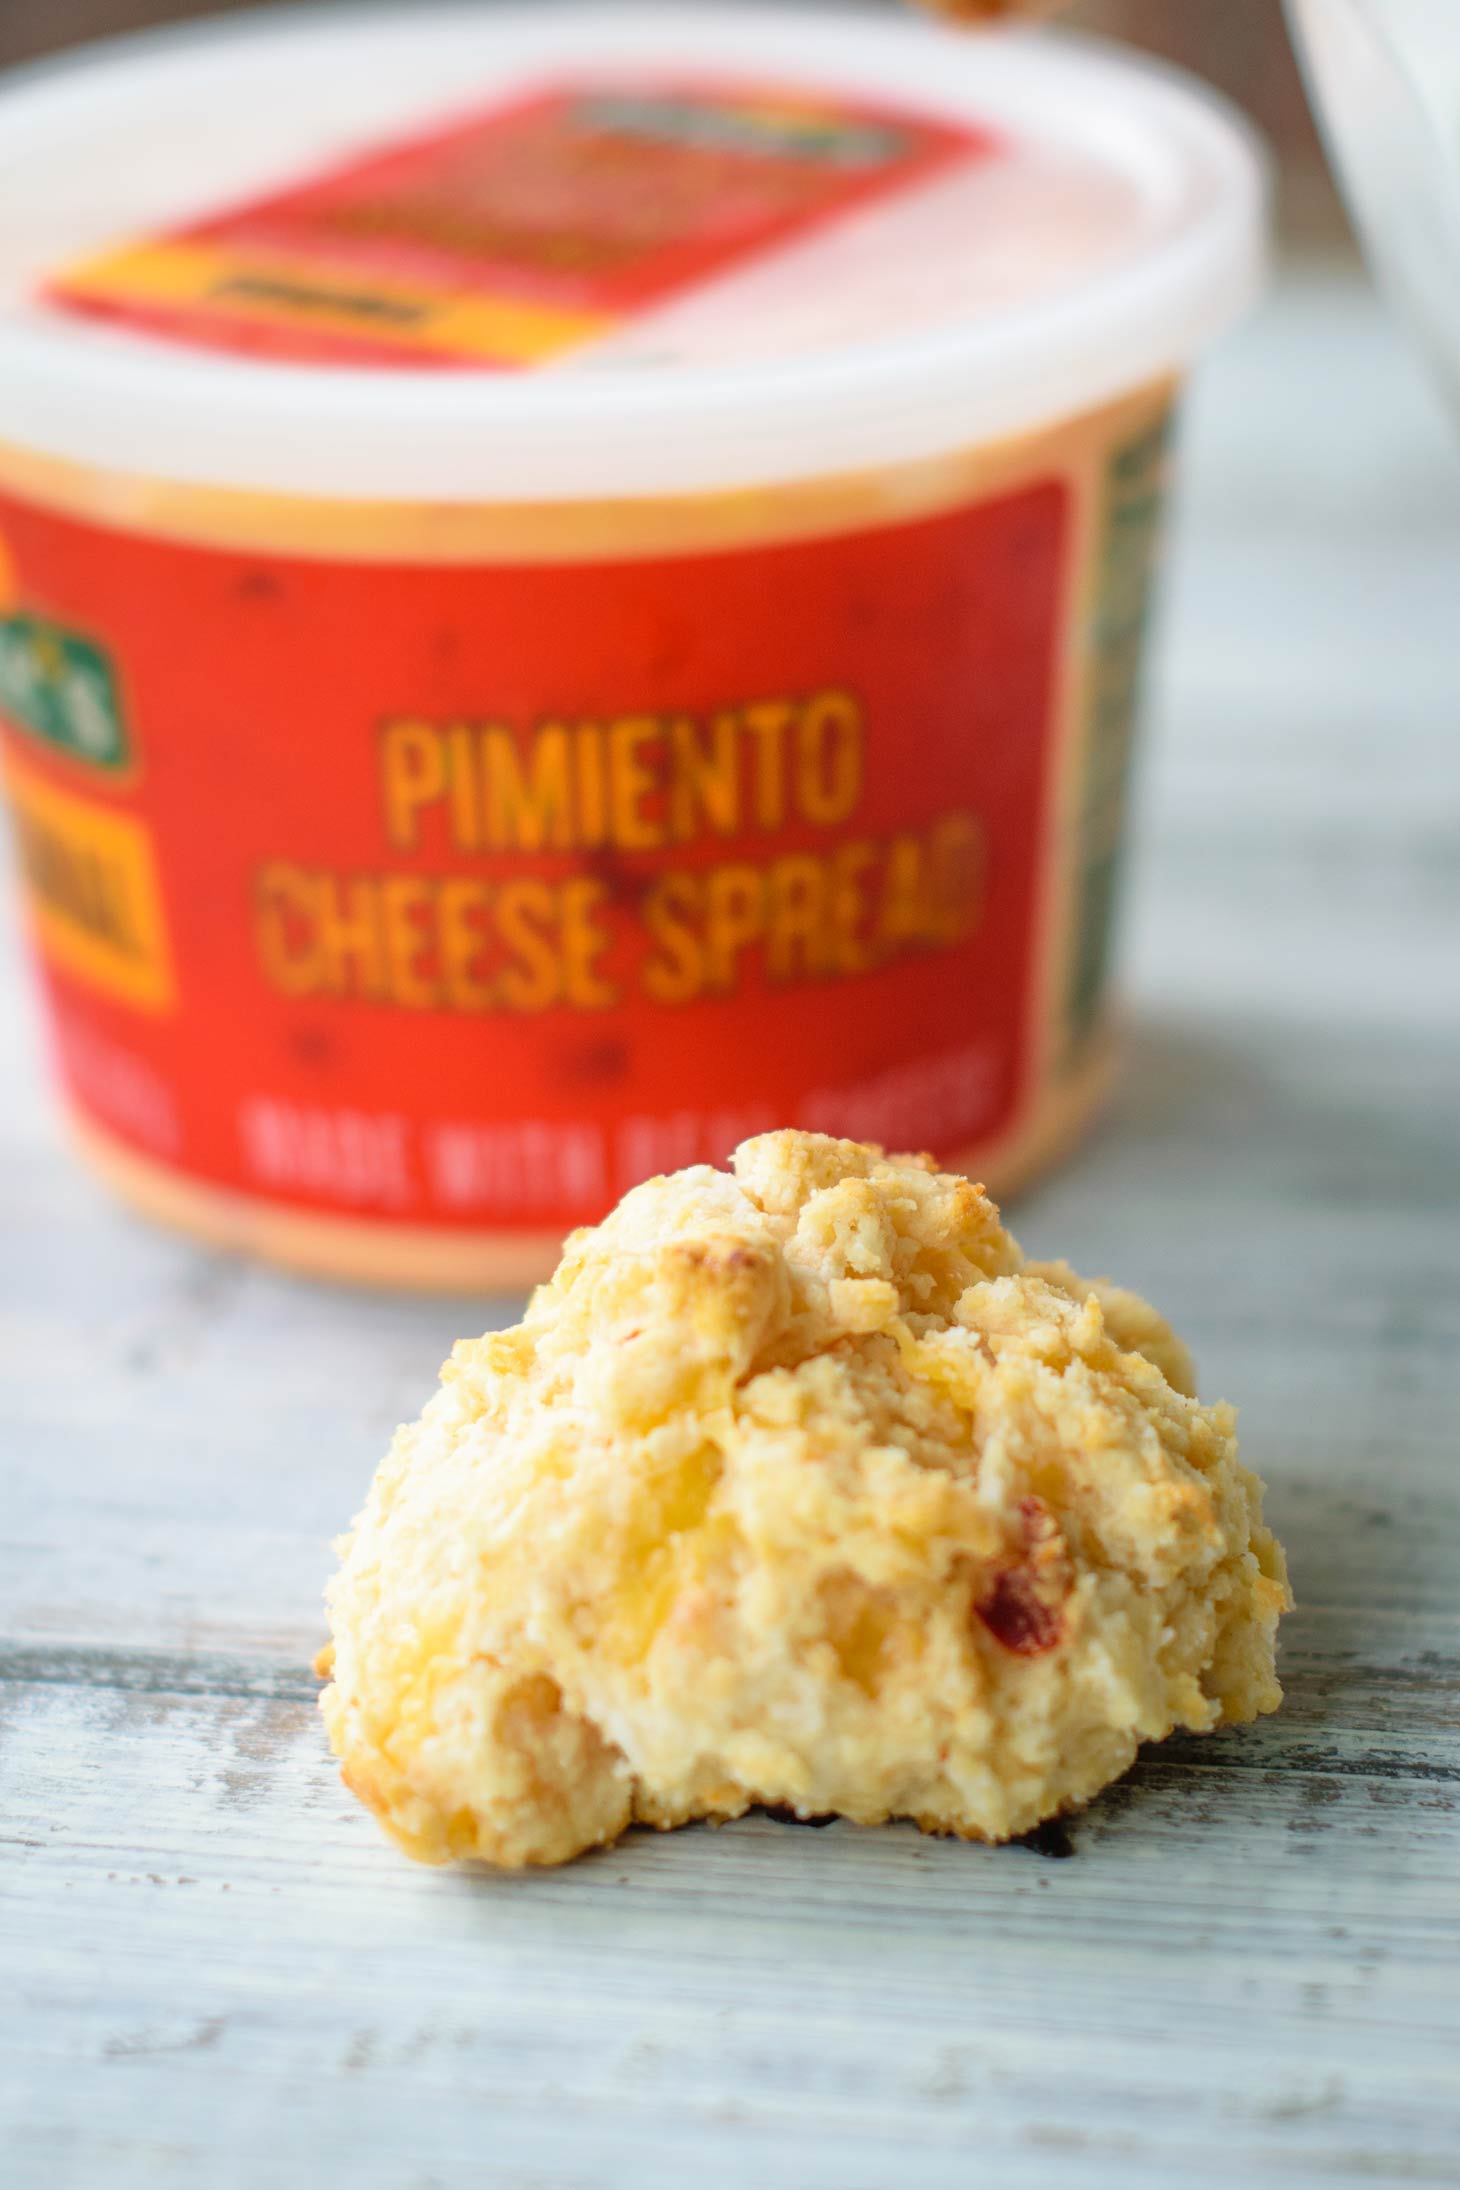 Pimiento cheese makes quick and easy cheese biscuits